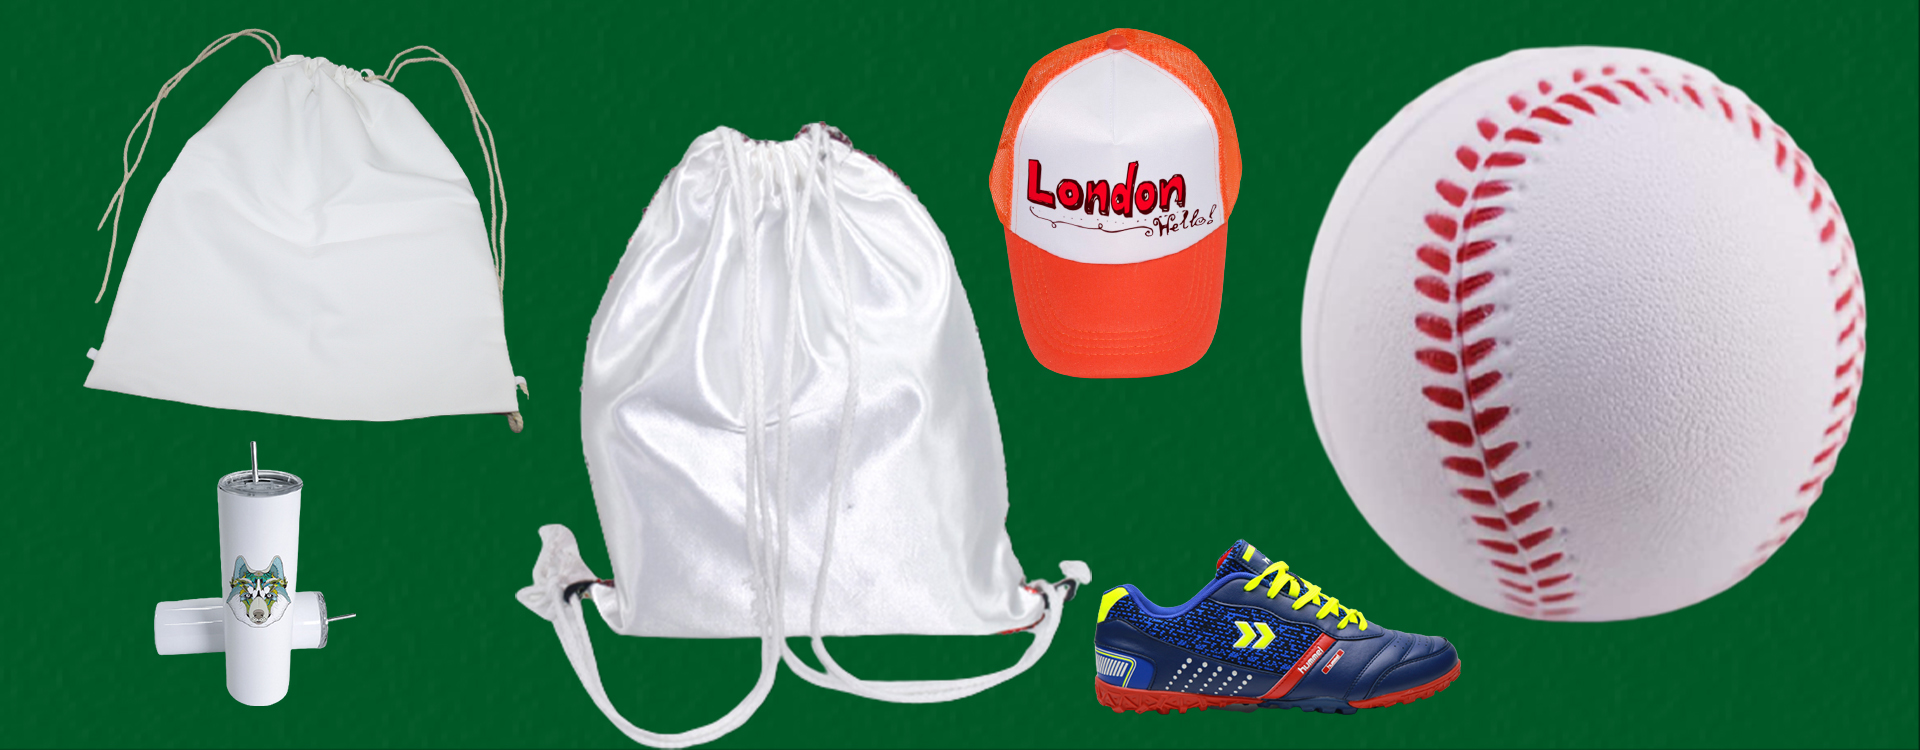 promotional marketing Top Gifts for Sports Events